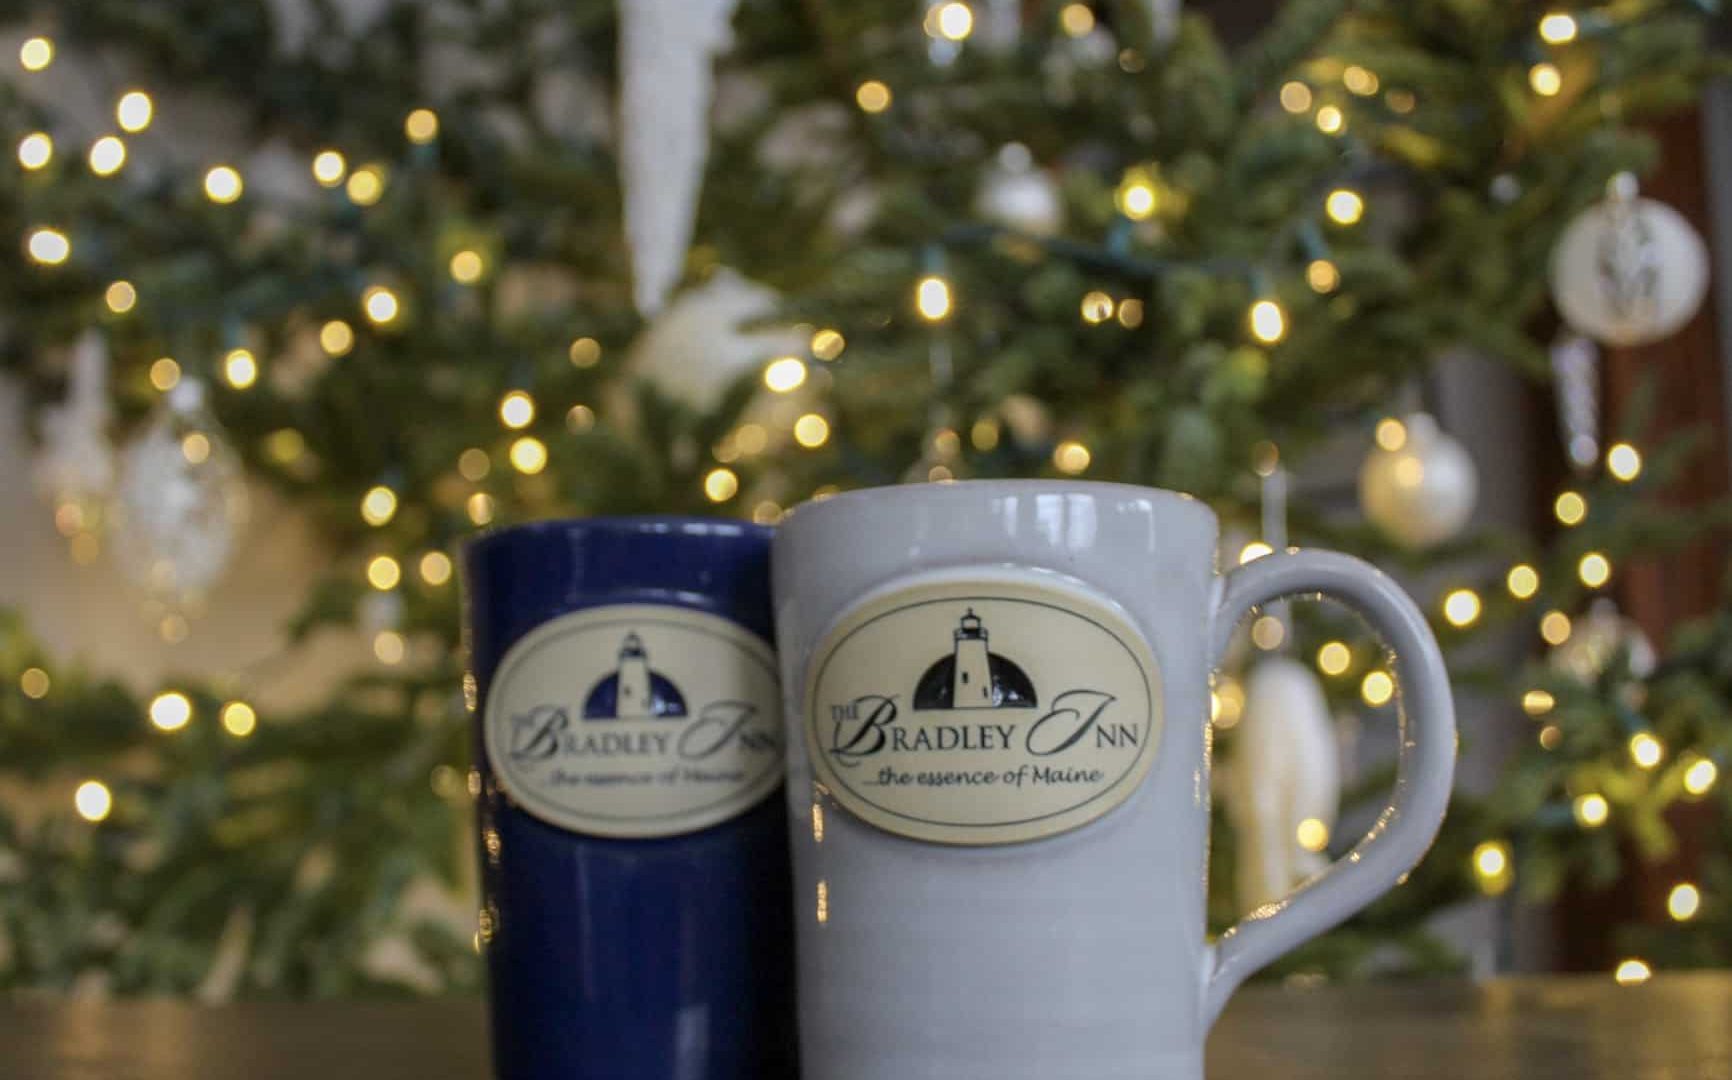 Navy blue and off white bradley inn mugs in front of the christmas tree with white ornaments and tiny white lights.